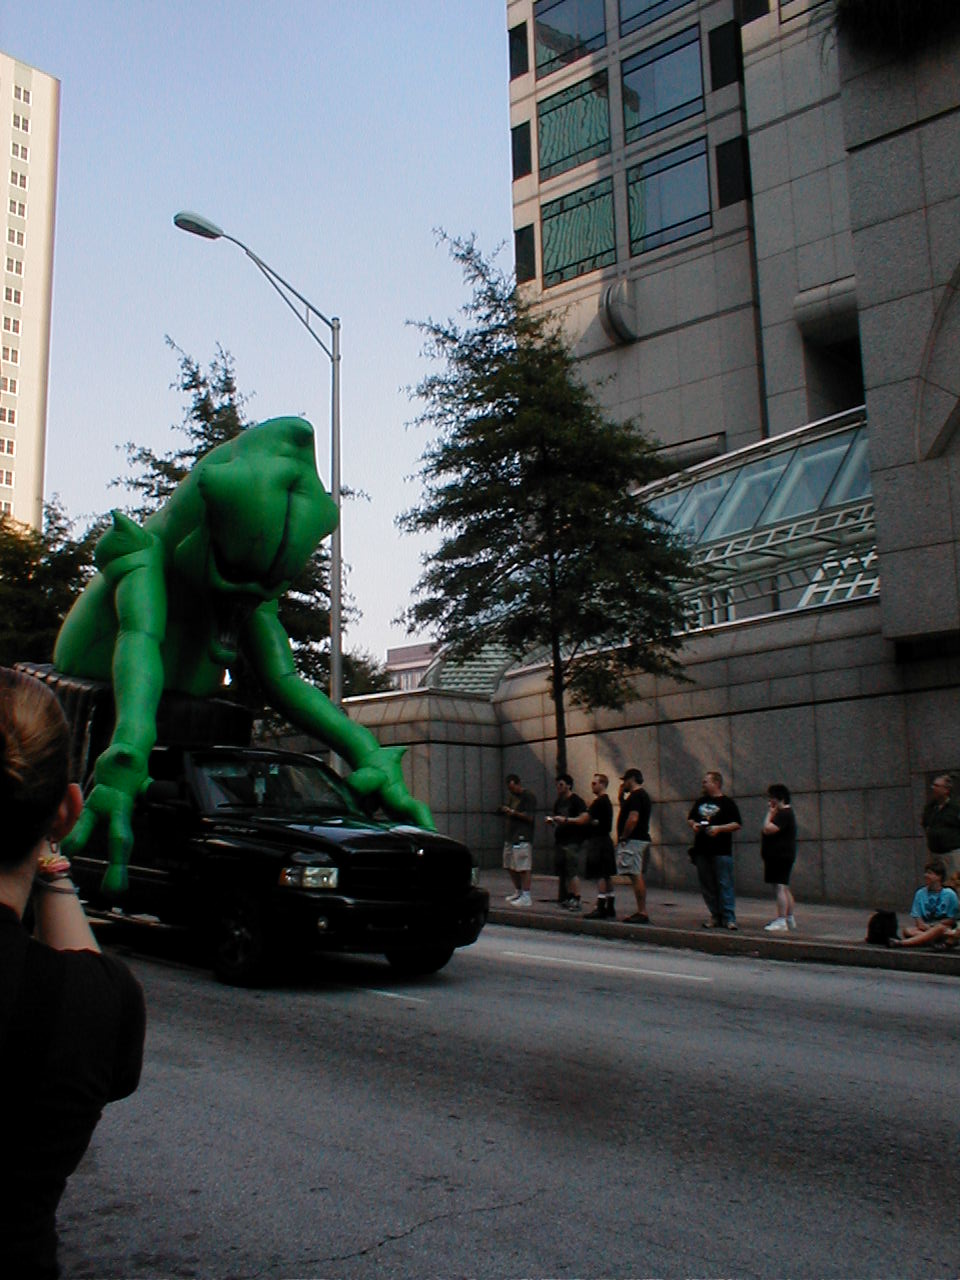 large green giant creature on a car in the road